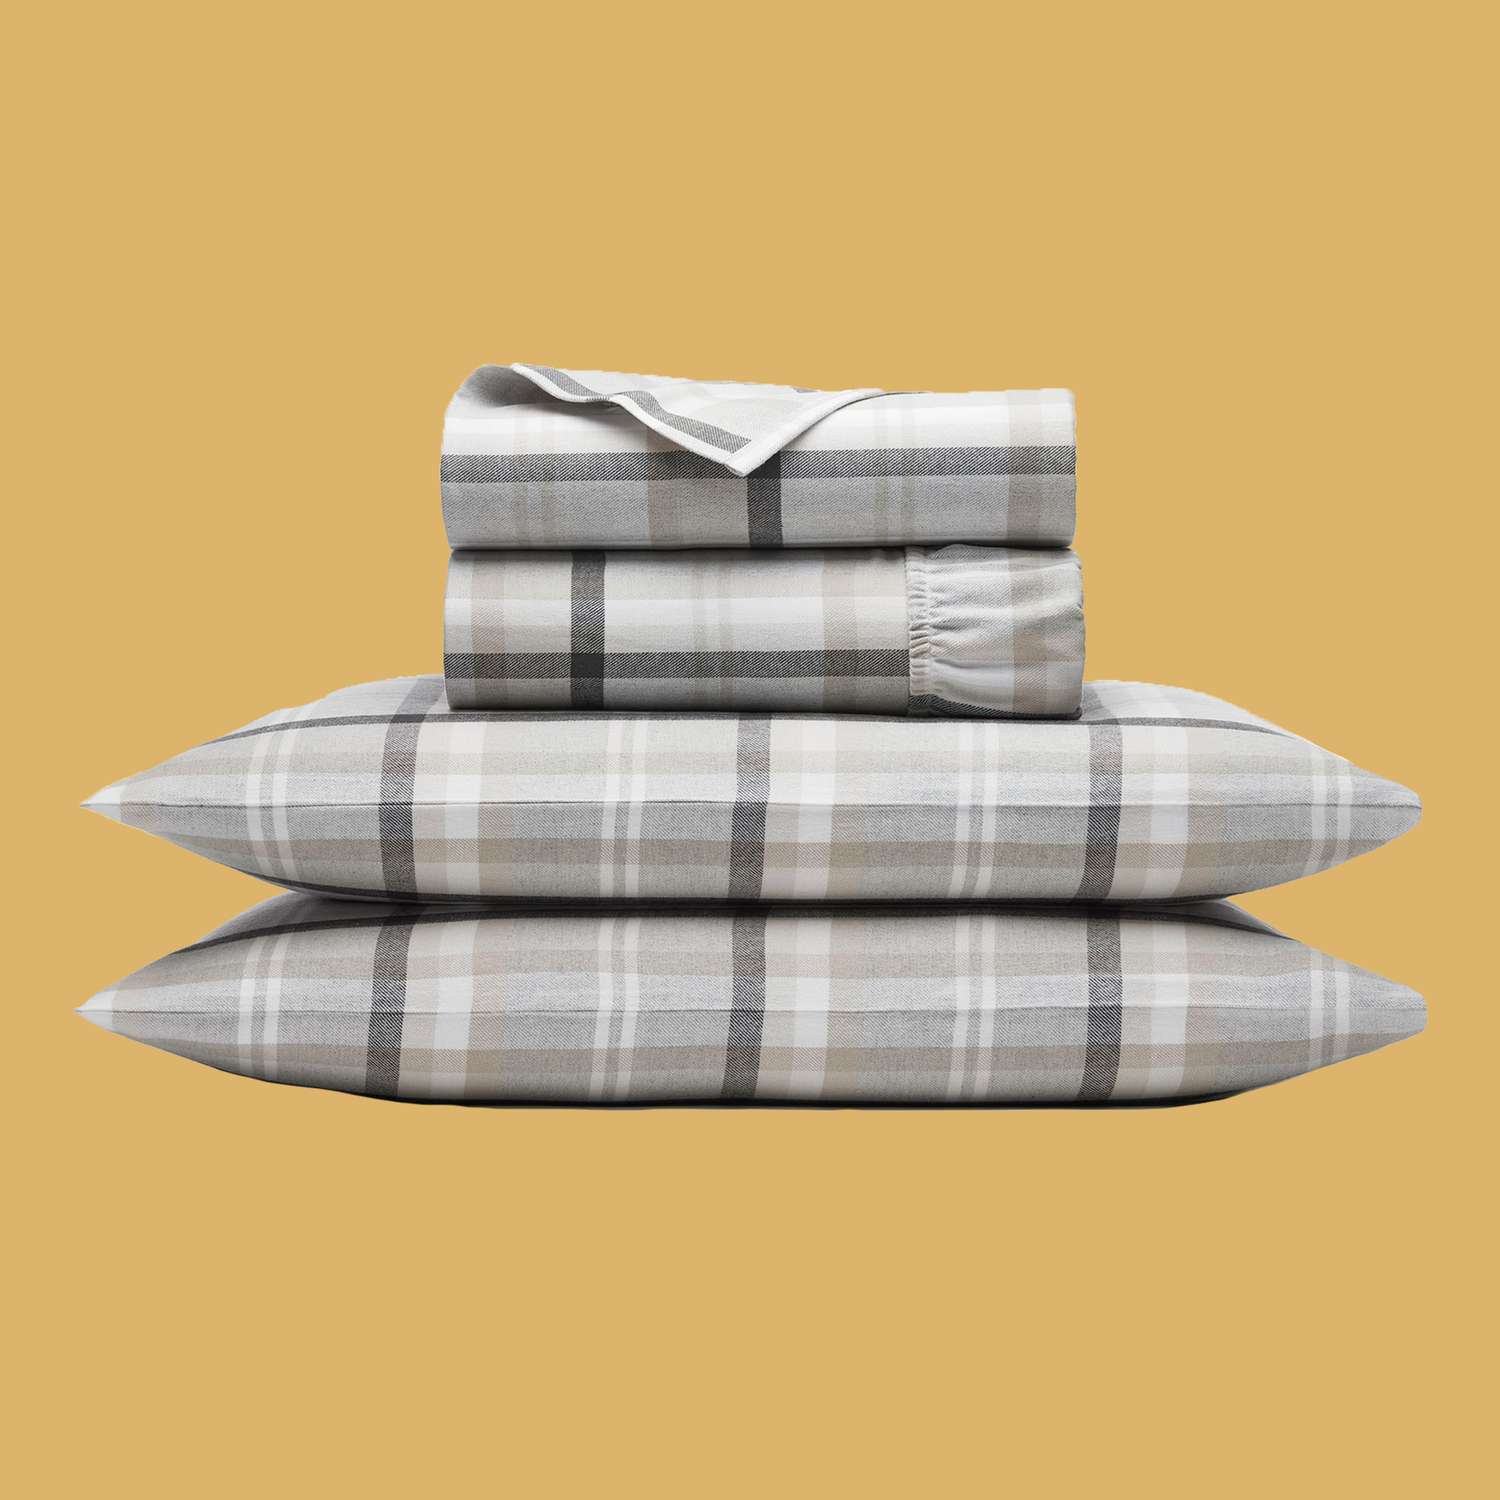 Boll & Branch Flannel Sheet in Shore Heathered Plaid Set